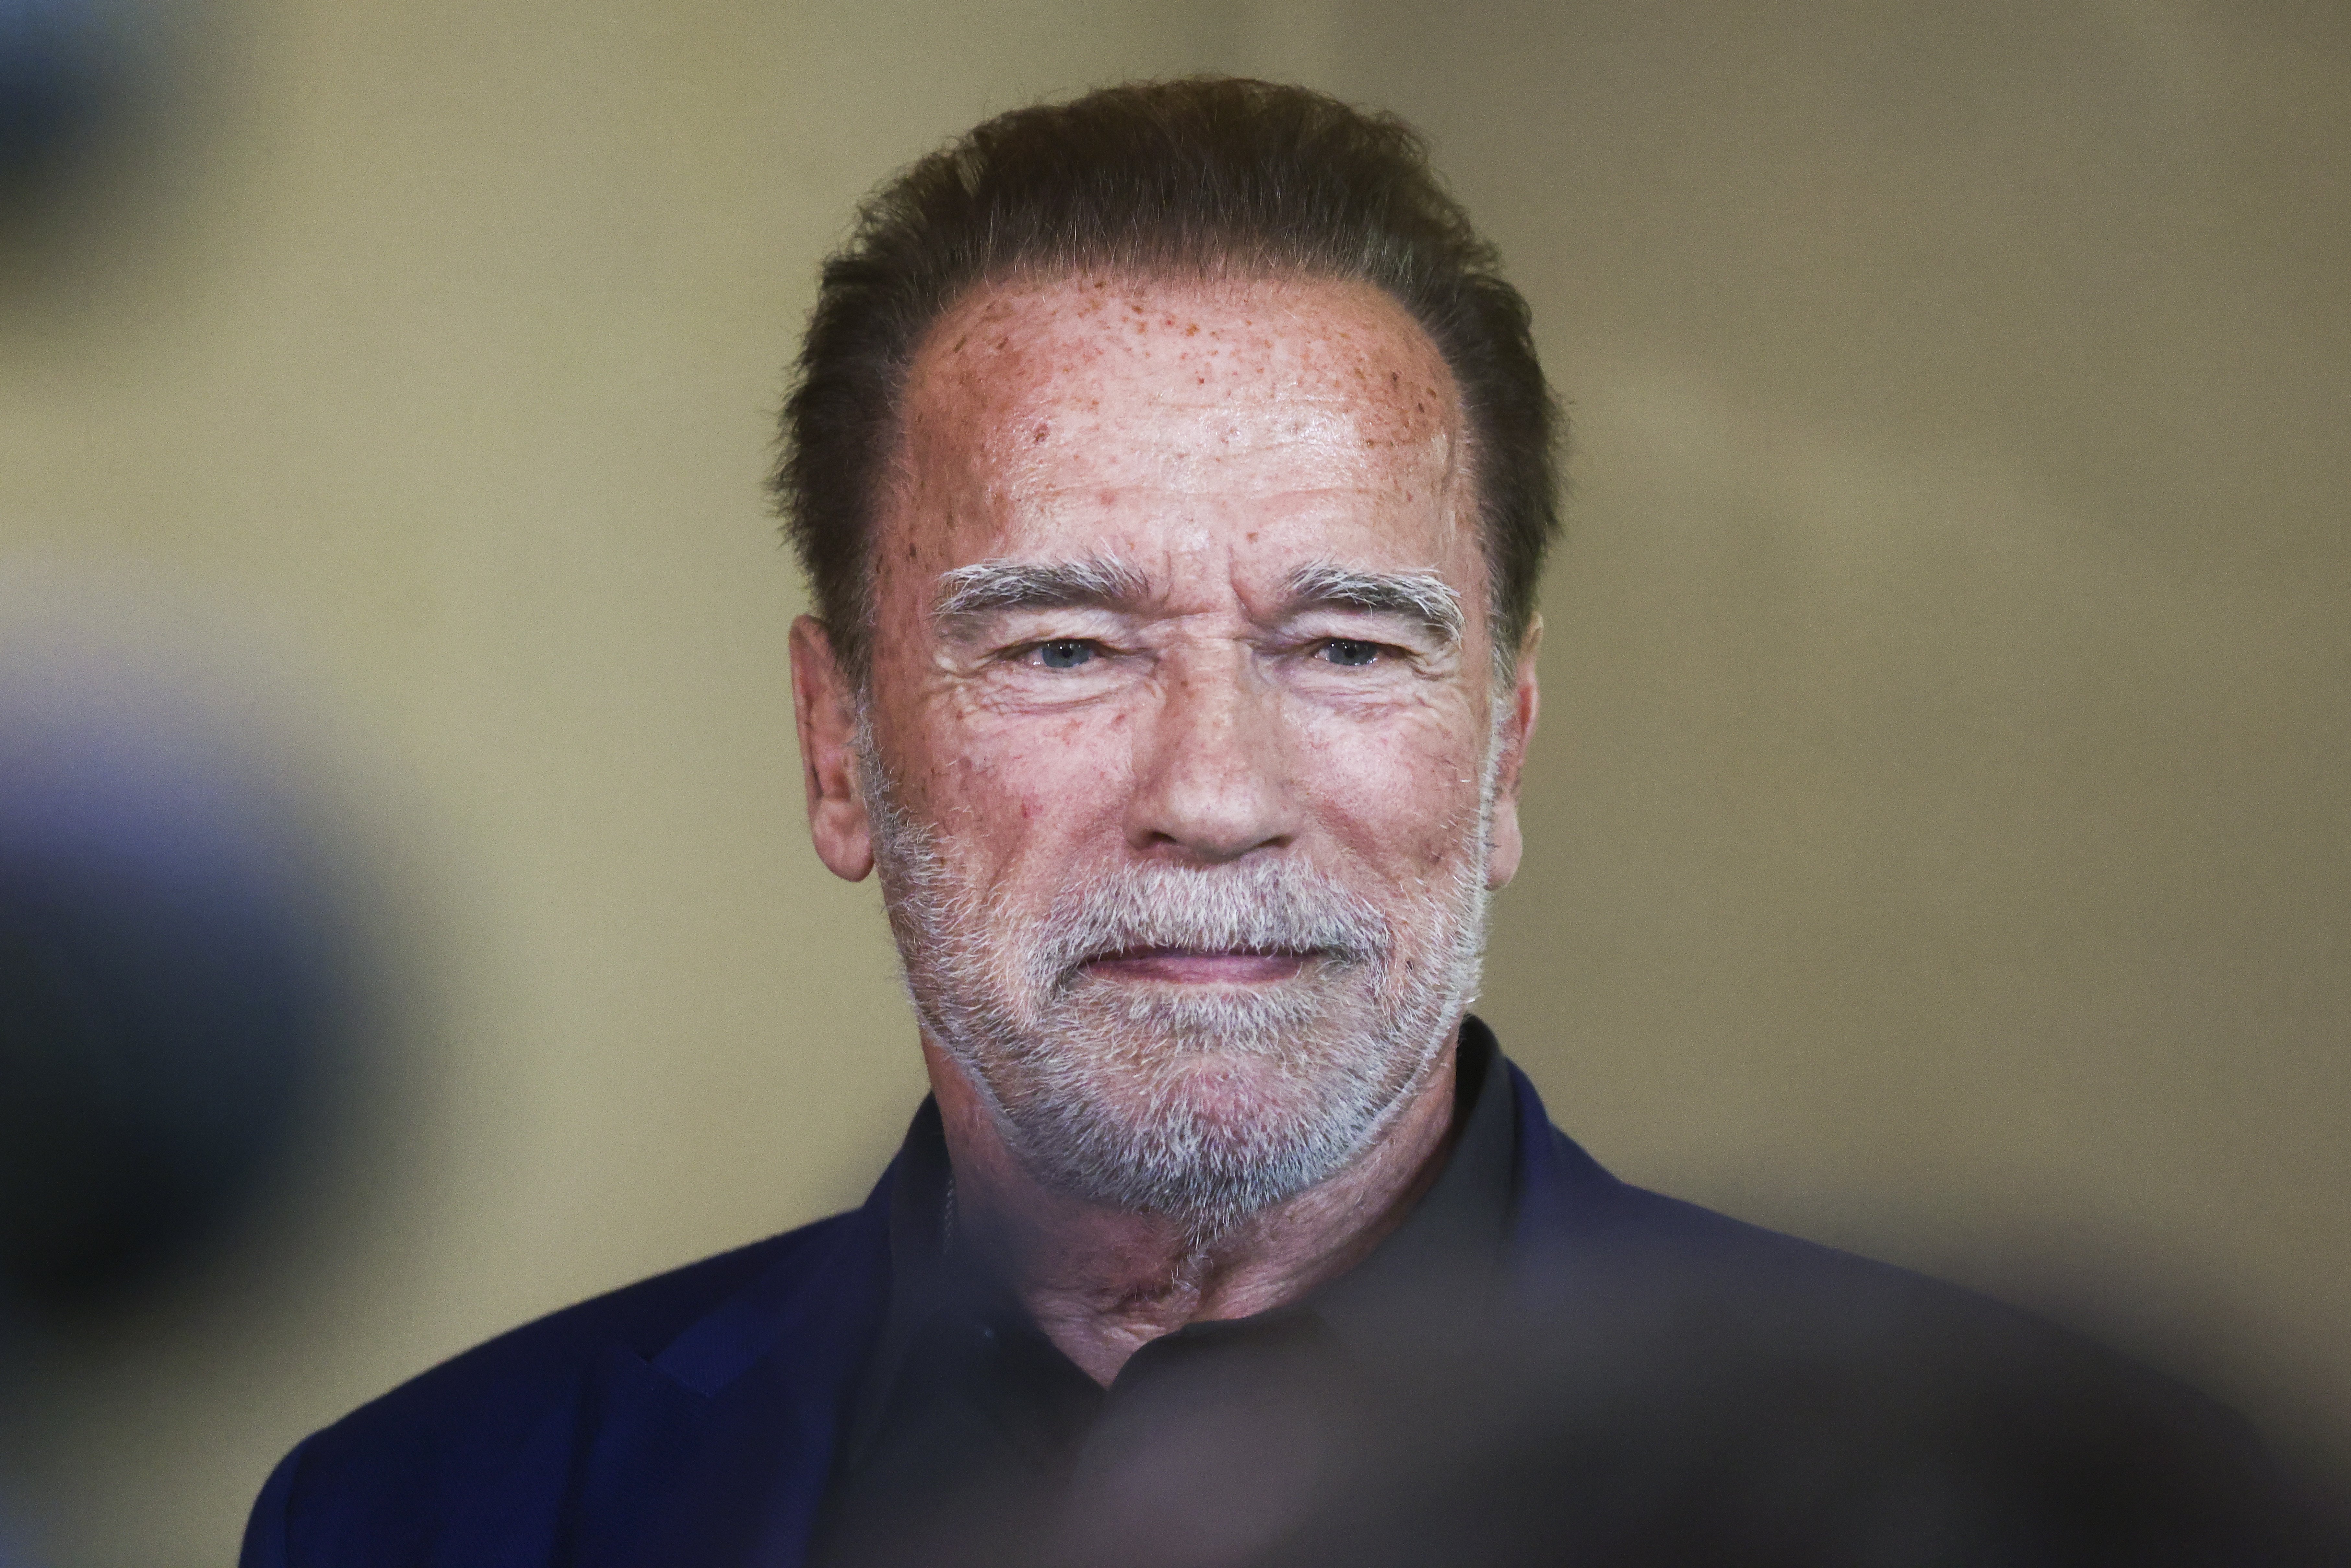 Arnold Schwarzenegger is seen inside a former synagogue that now is home to the Auschwitz Jewish Center Foundation after visiting former Nazi German Auschwitz Birkenau concentration and extermination camp. Oswiecim, Poland n September 28, 2022. | Source: Getty Images